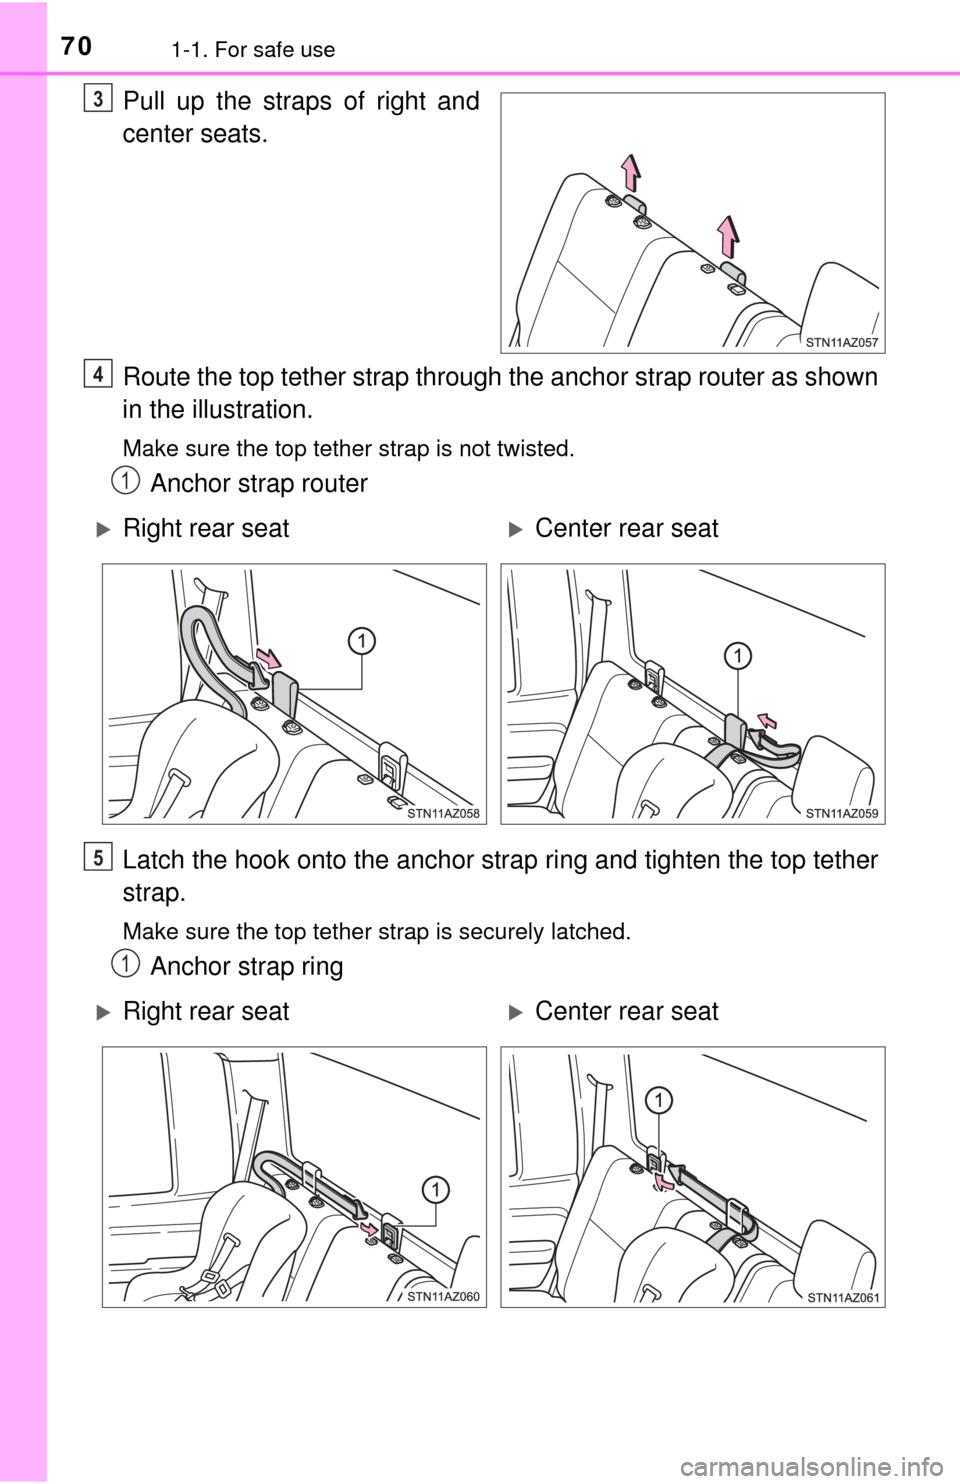 TOYOTA TUNDRA 2017 2.G Owners Manual 701-1. For safe use
Pull up the straps of right and
center seats.
Route the top tether strap through the anchor strap router as shown
in the illustration.
Make sure the top tether strap is not twisted